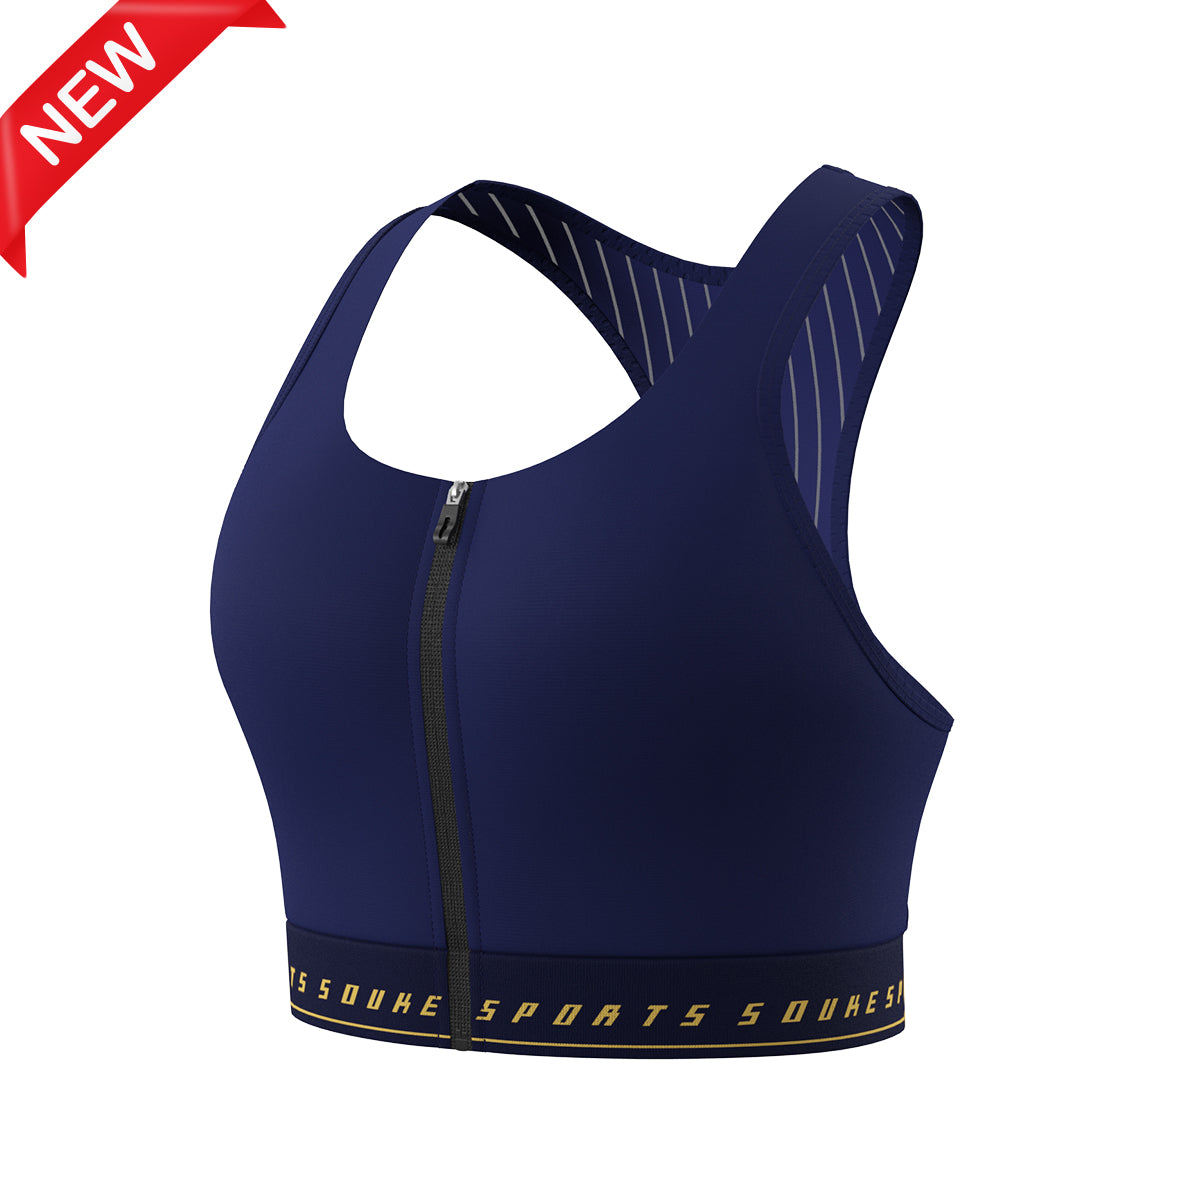 Souke Sports New Women's Classic Cycling/Yoga Crop Top BR2301--Navy Blue